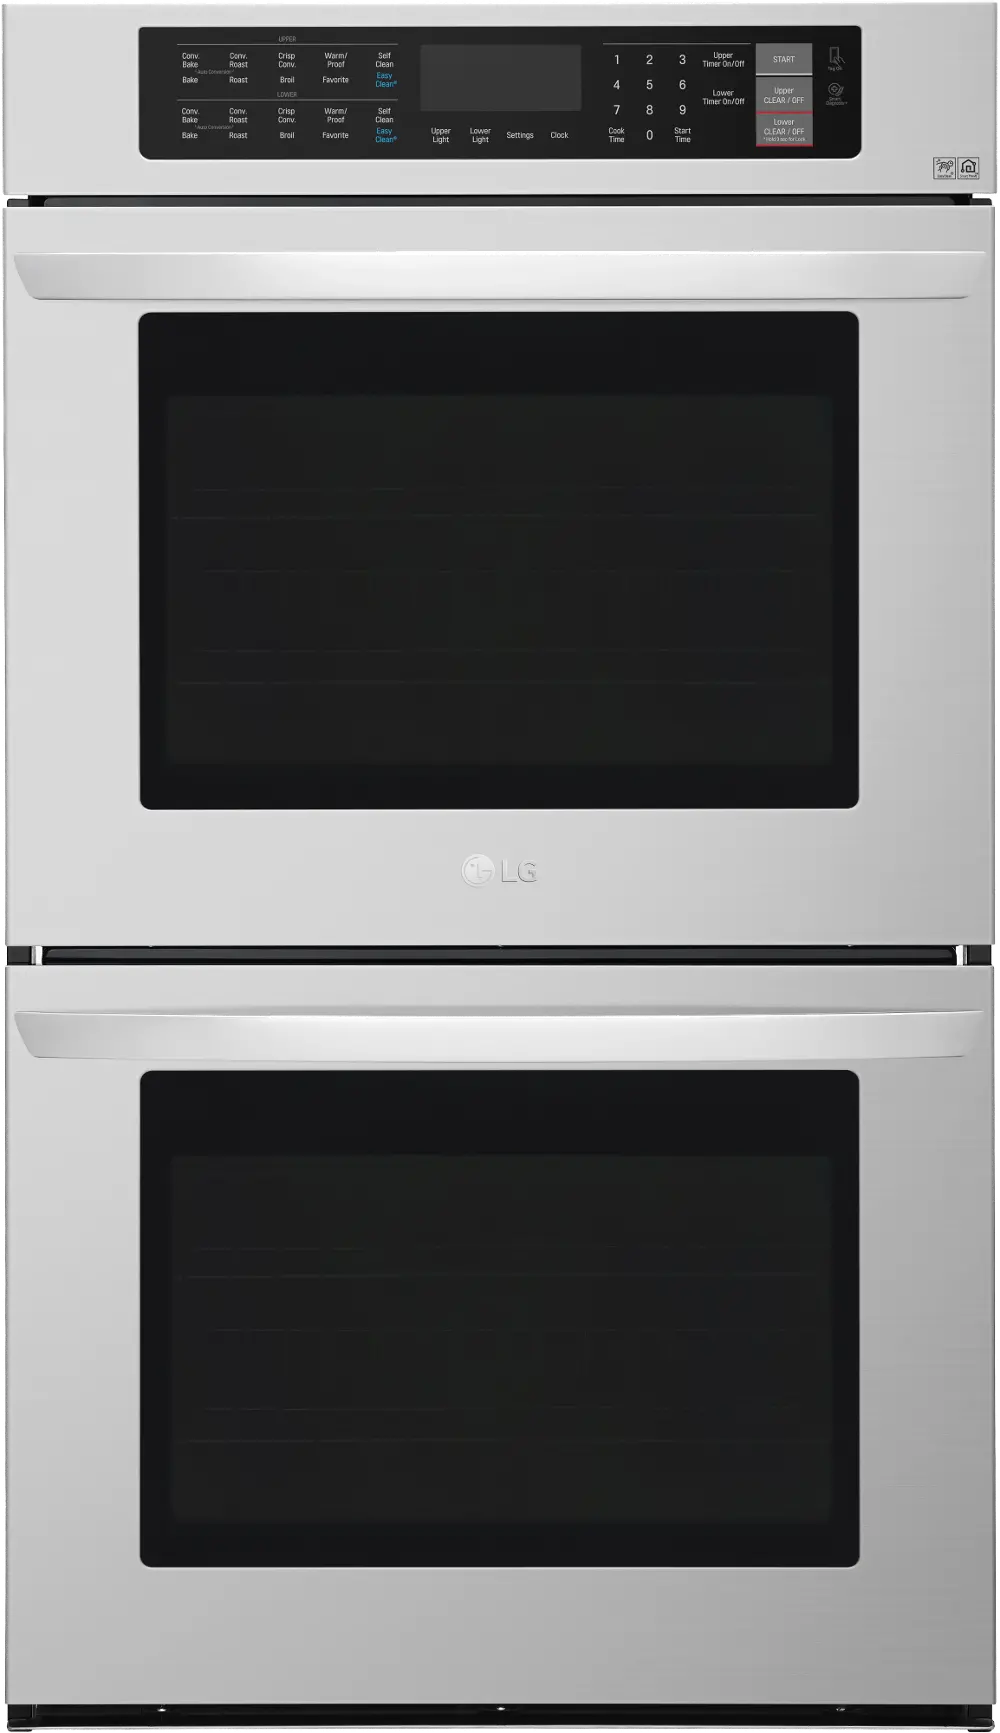 LWD3063ST LG 9.4 cu ft Double Wall Oven - Stainless Steel 30 Inch-1